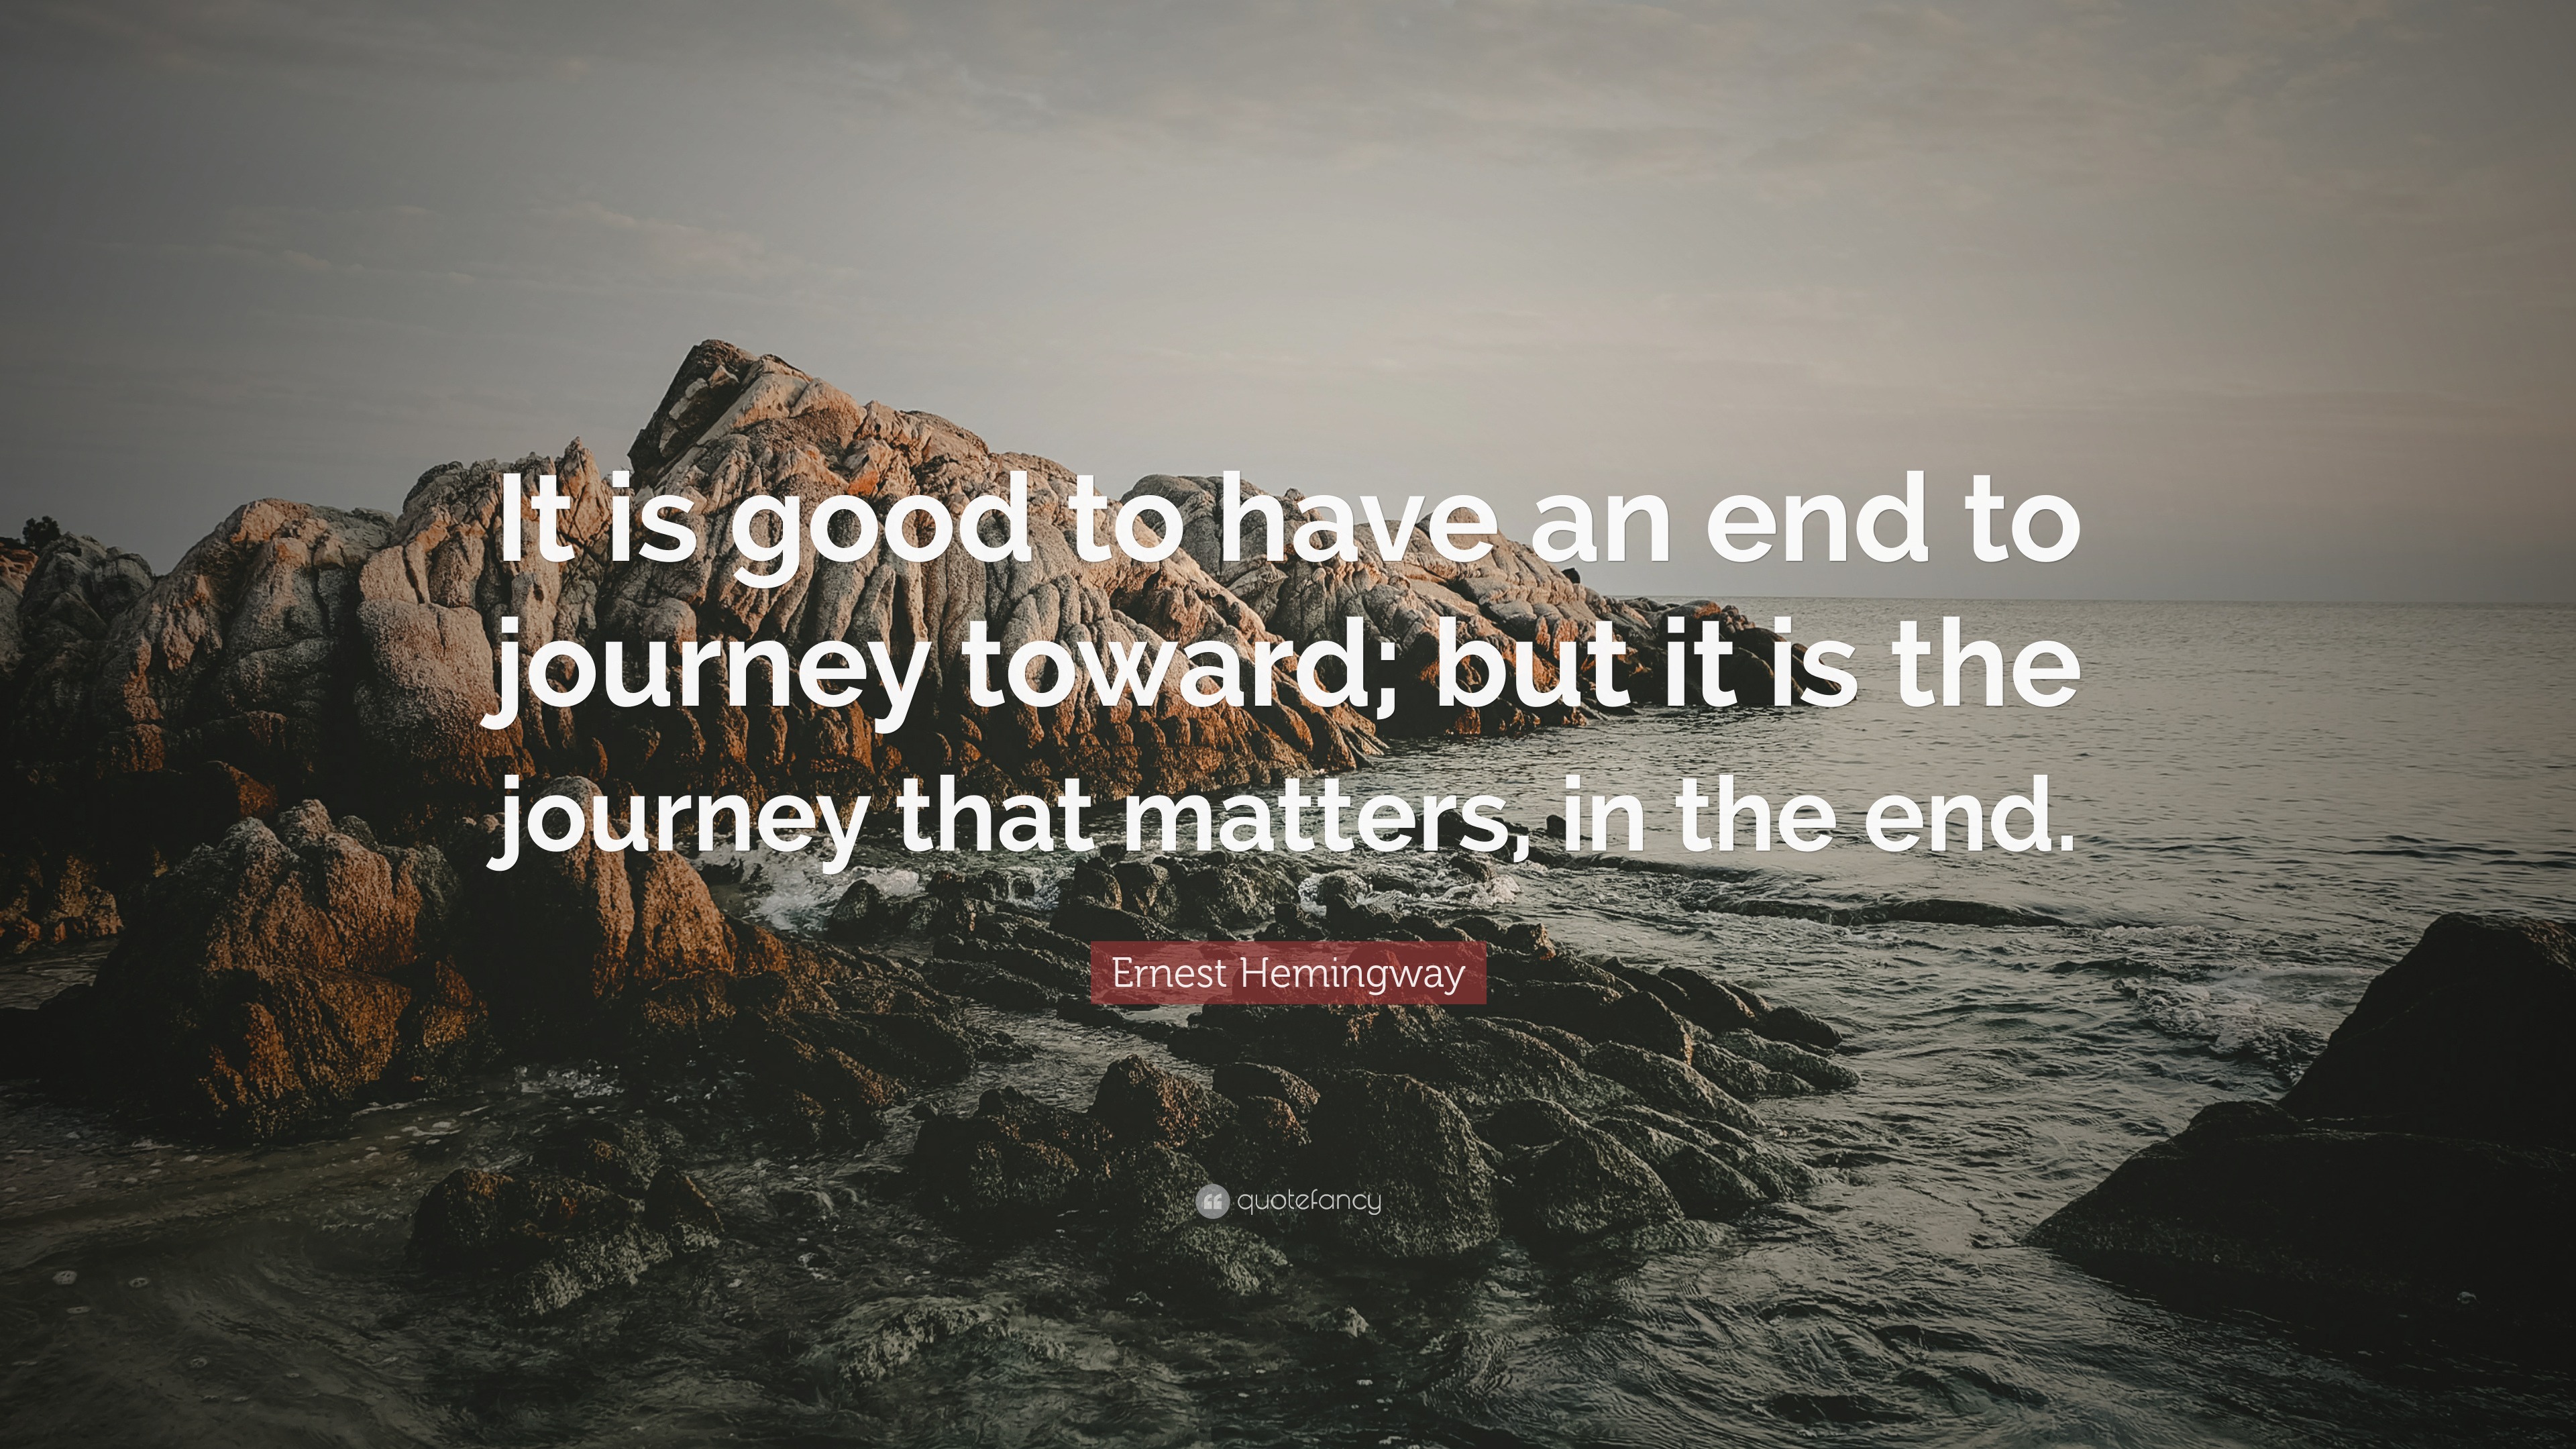 Ernest Hemingway Quote “It is good to have an end to journey toward